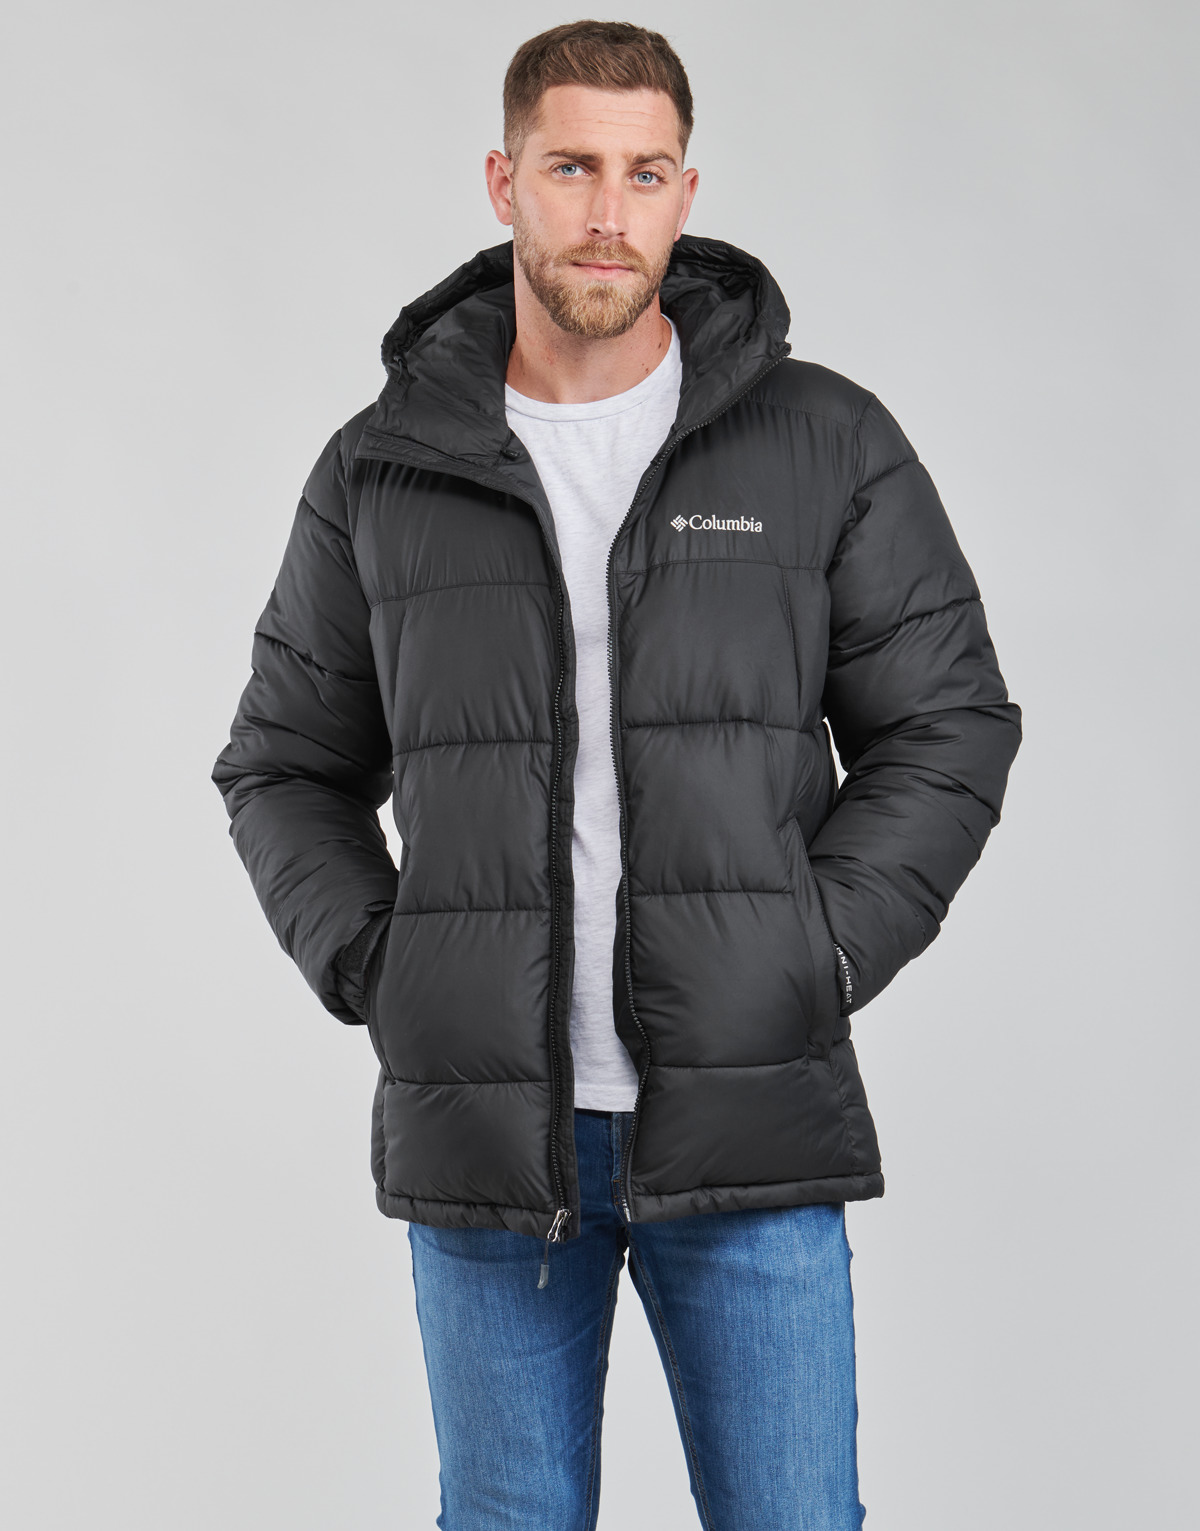 Columbia Jackets & Coats for Men sale - discounted price | FASHIOLA INDIA